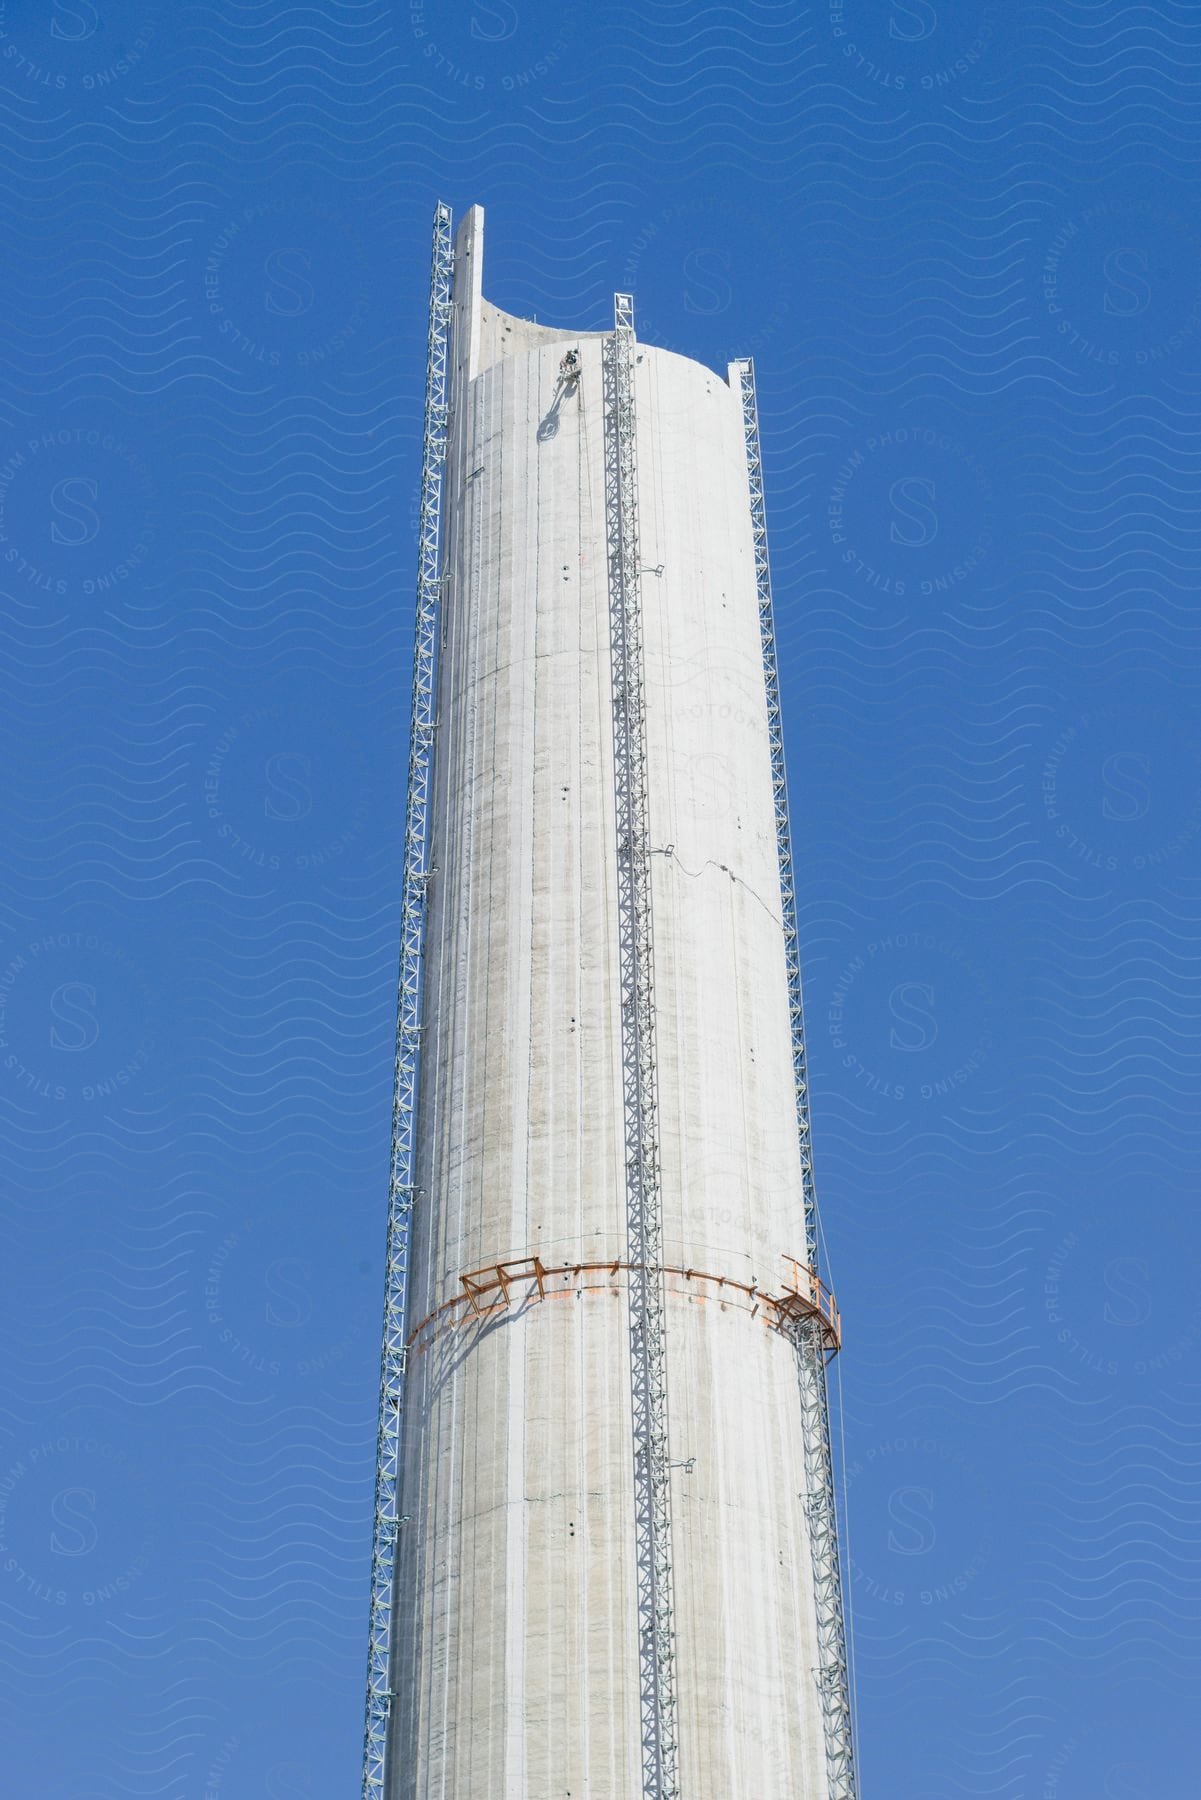 An industrial cooling tower with a man cleaning the outside.